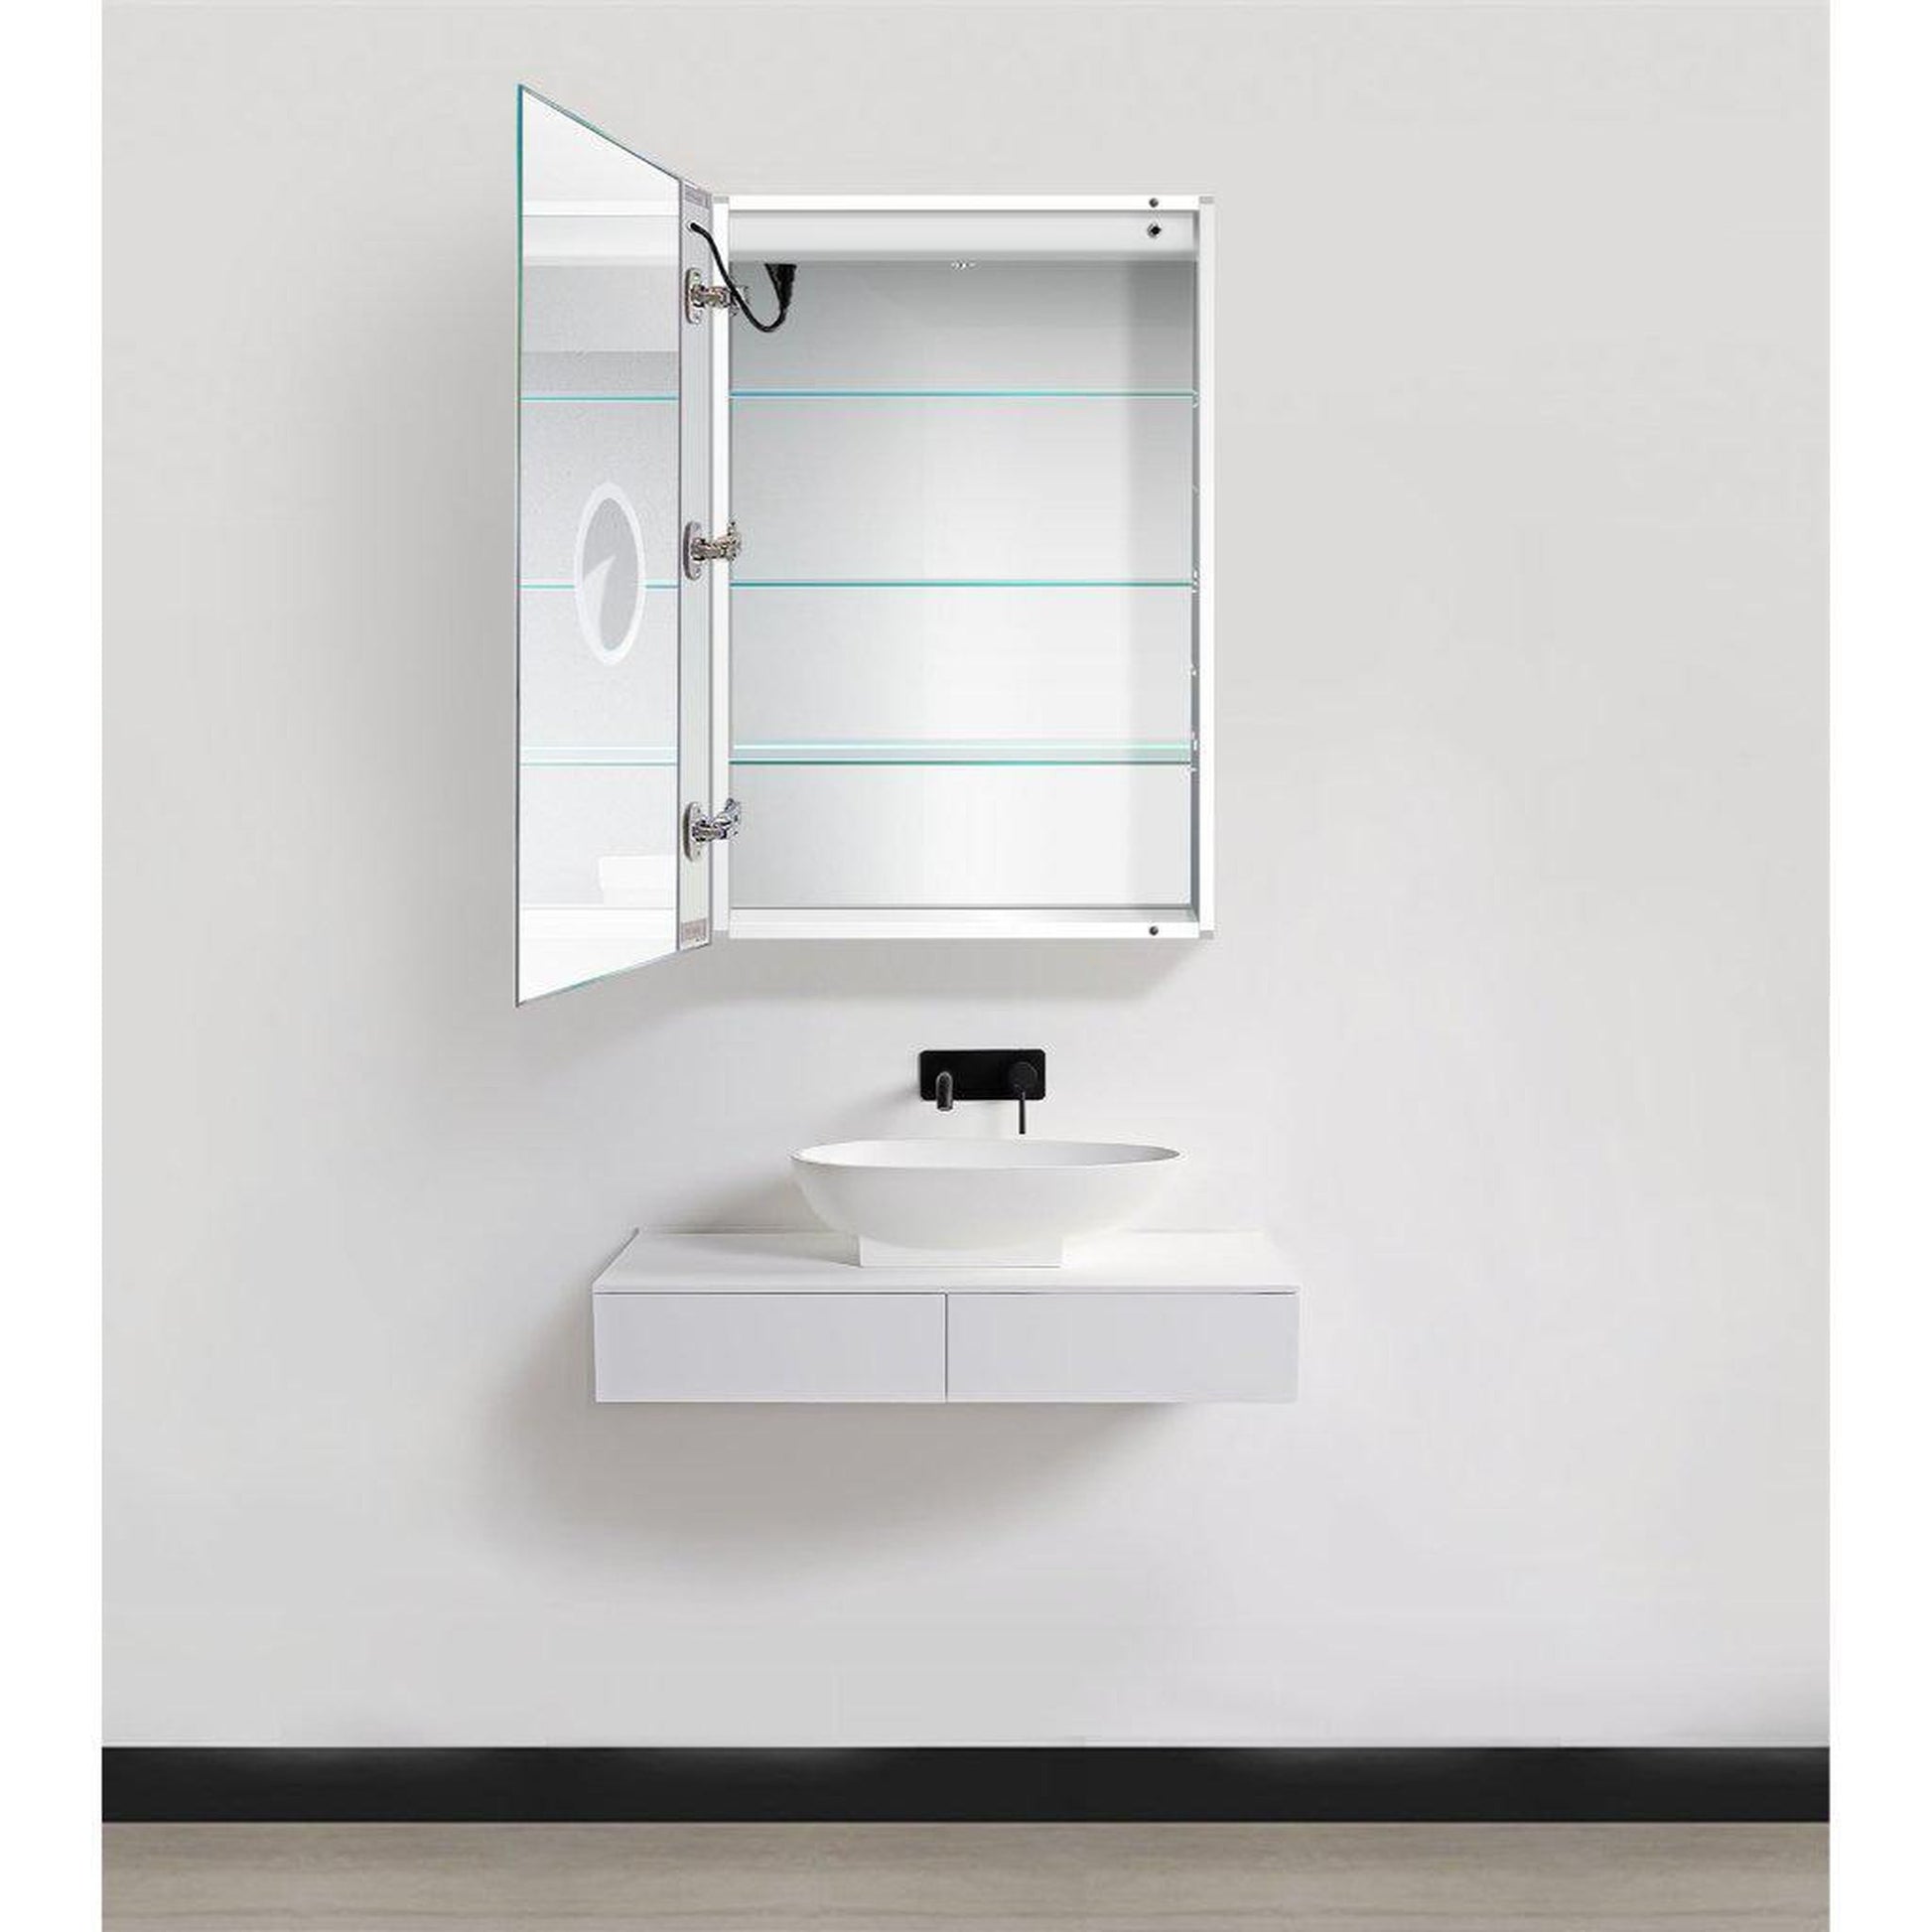 Krugg Reflections Svange 24" x 36" 5000K Single Left Opening Rectangular Recessed/Surface-Mount Illuminated Silver Backed LED Medicine Cabinet Mirror With Built-in Defogger, Dimmer and Electrical Outlet